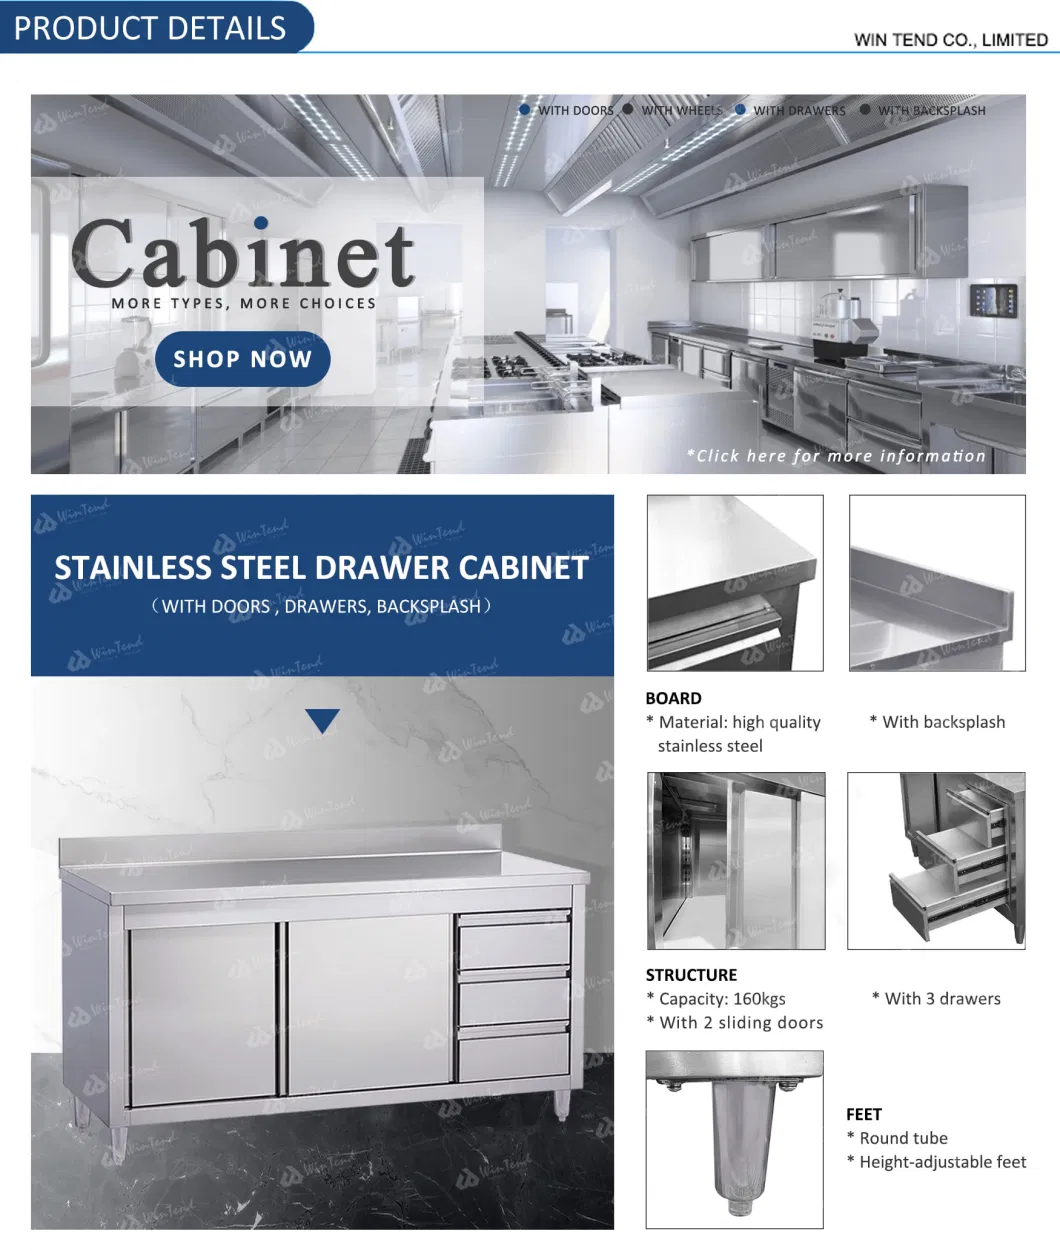 Manufactory Commercial Catering Restaurant Hotel Kitchen Equipment Appliance Stainless Steel Cabinet with Drawer and Cupboard